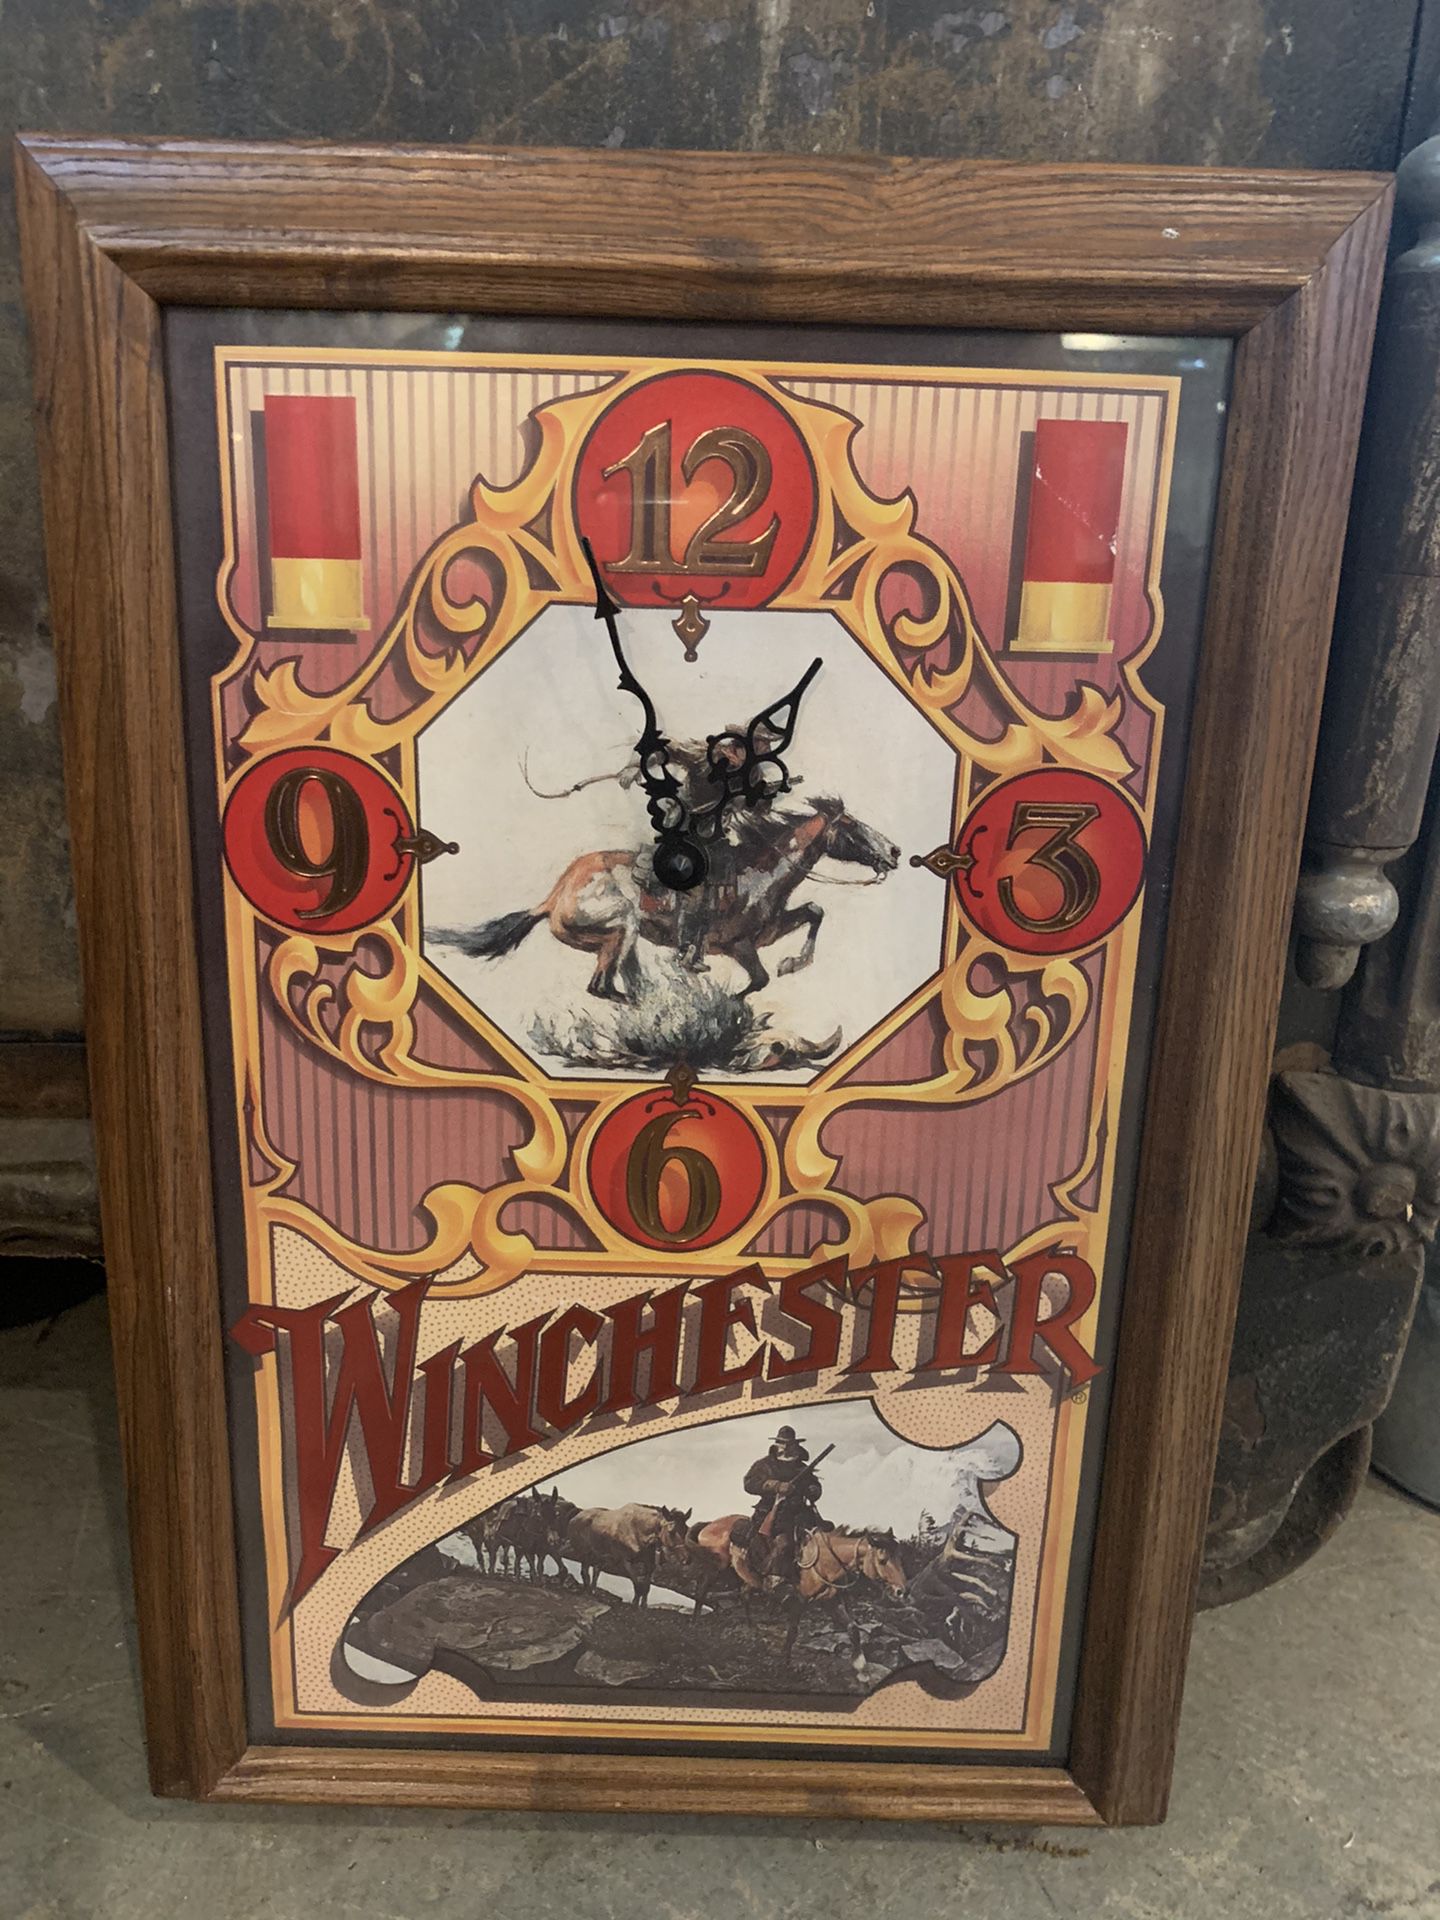 13x19 vintage WINCHESTER CLOCK. “Works”. 38.00. 212 North Main Street Buda. Furniture collectibles sterling silver jewelry man cave items vintage to